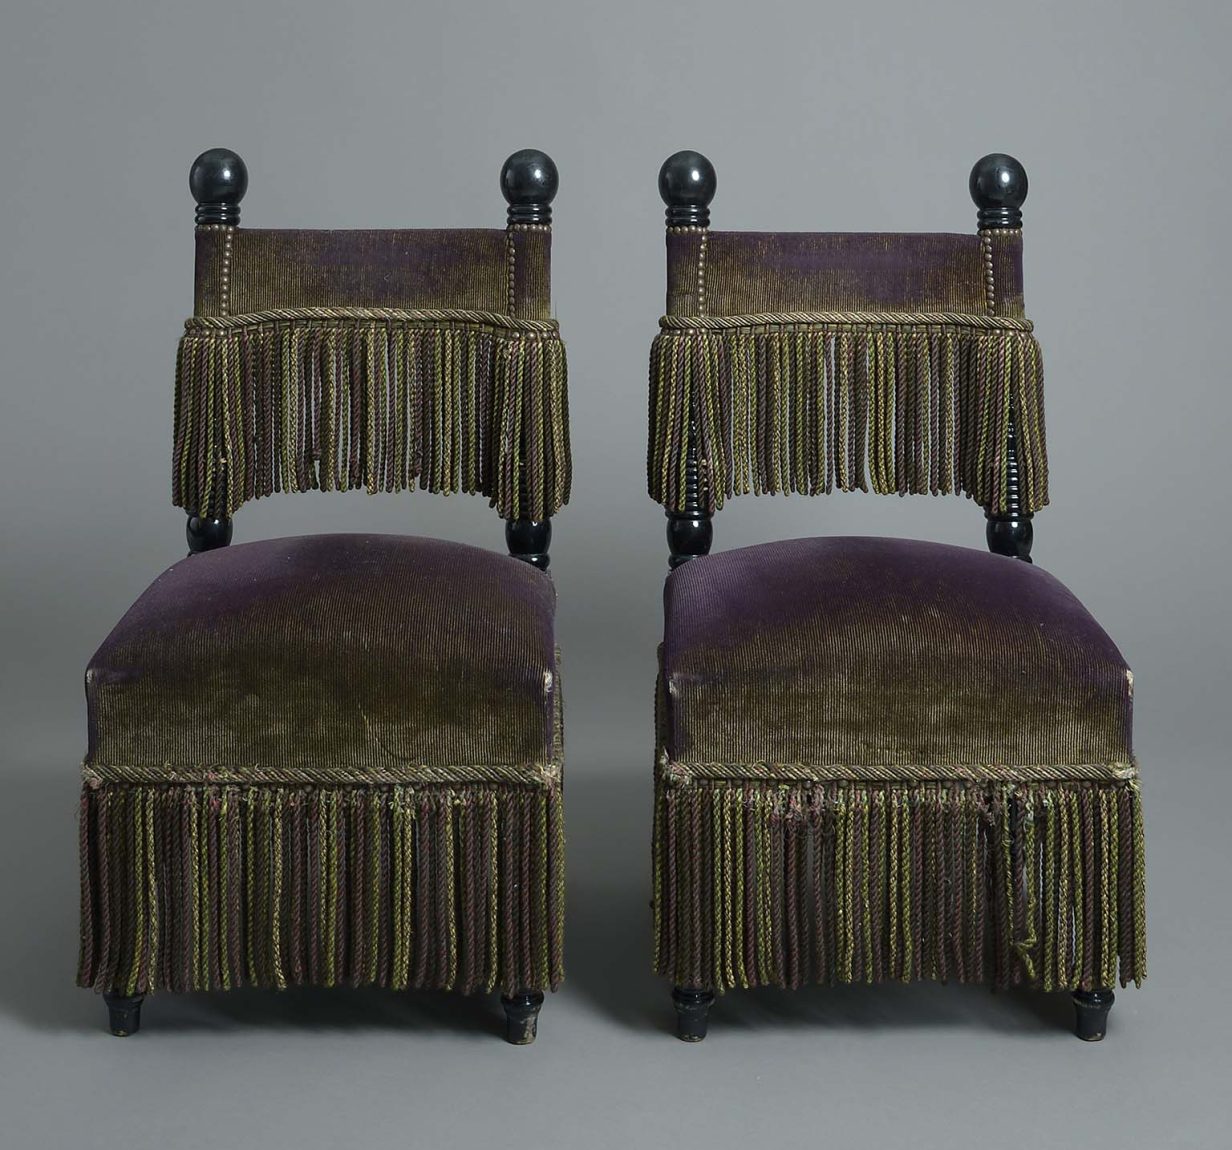 Pair of salon chairs